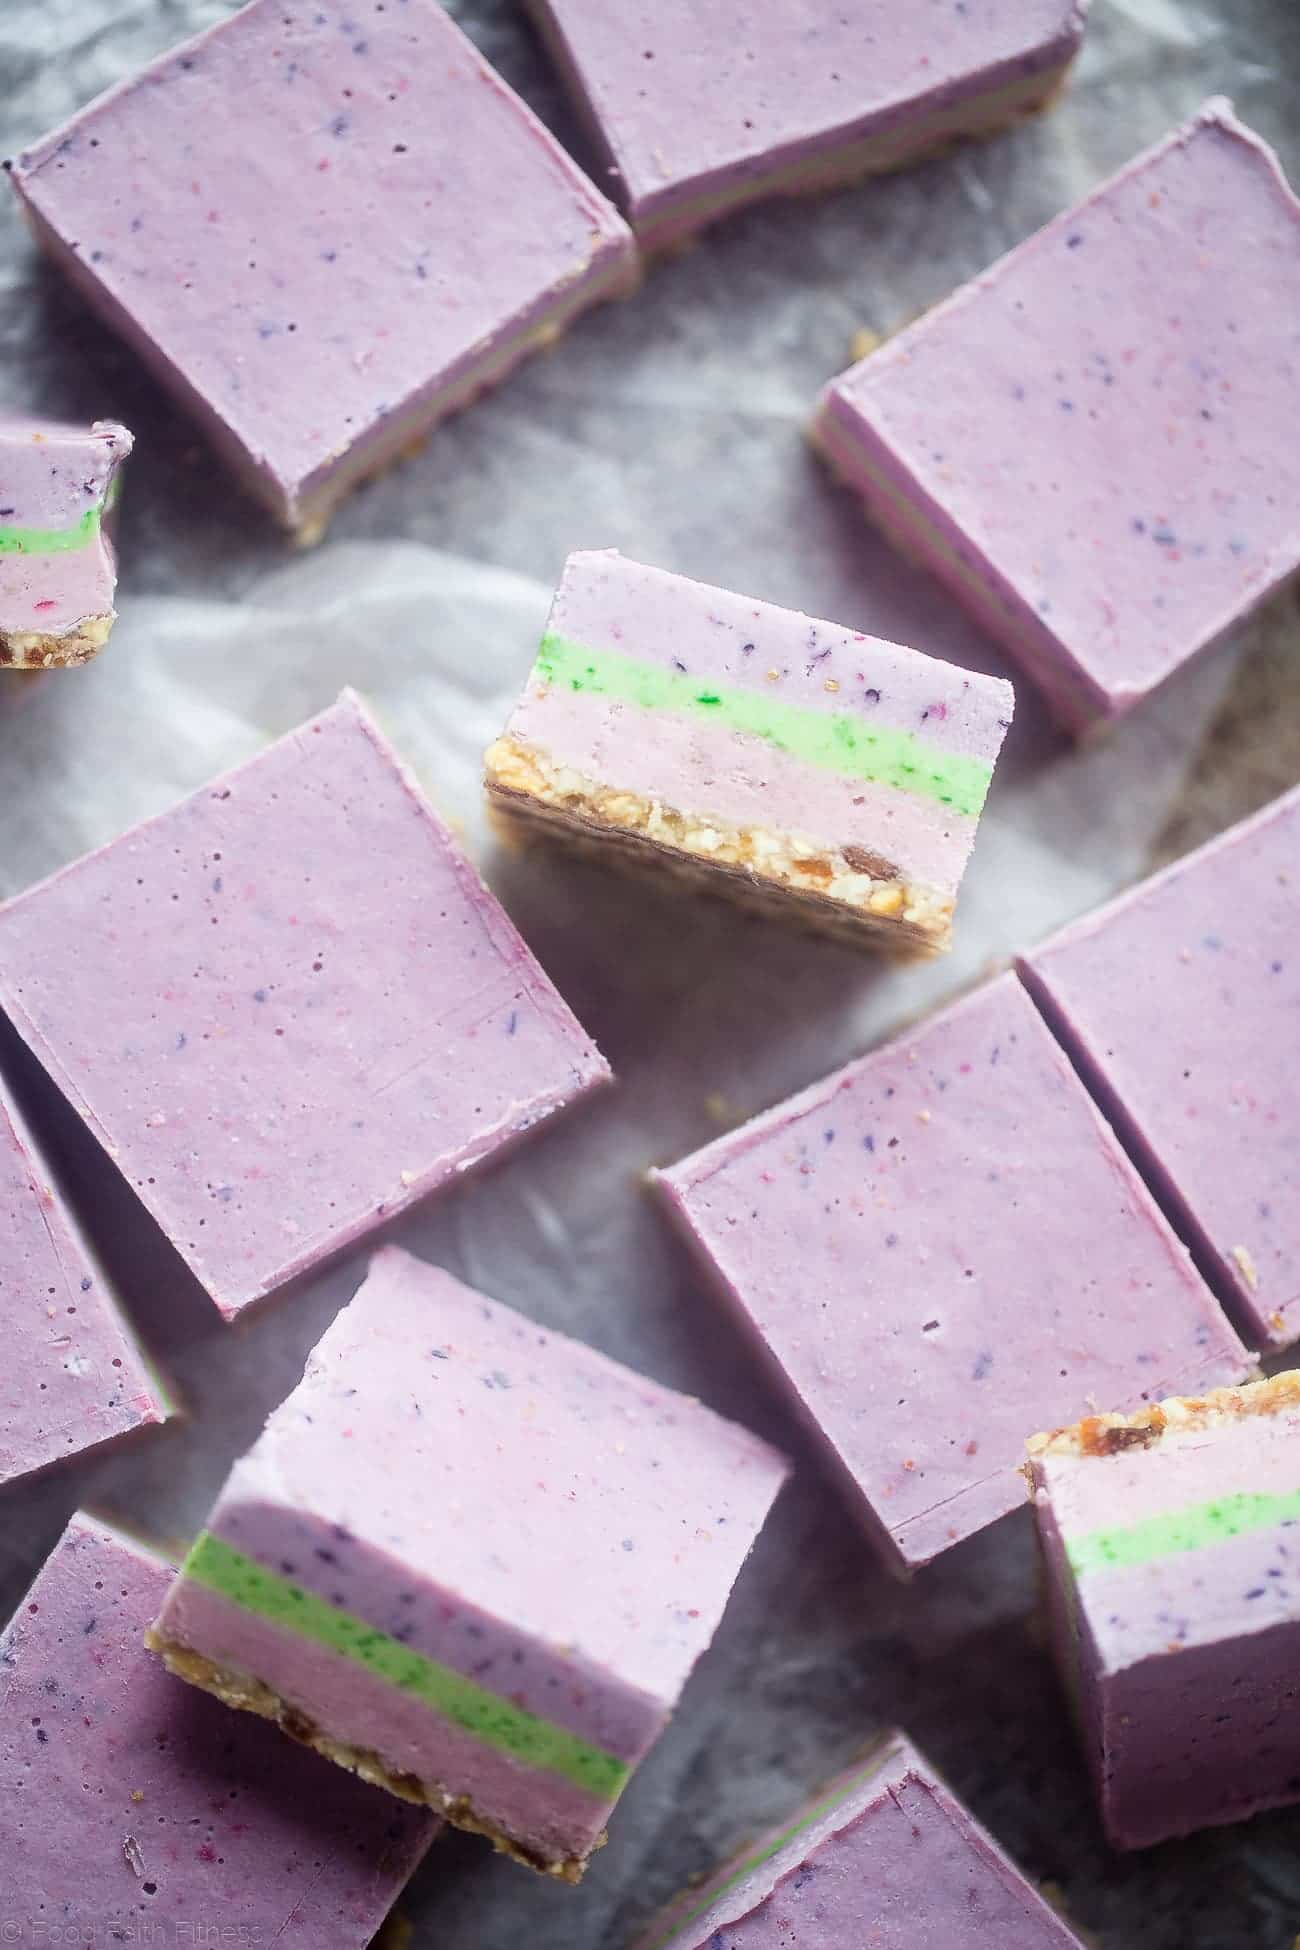 No Bake Superfood Berry Cashew Cream bars - These vegan bars are naturally colored with fruit and vegetables! They're so creamy you'll never know they're healthy and dairy and gluten free! Perfect for Easter! | Foodfaithfitness.com | @FoodFaithFit